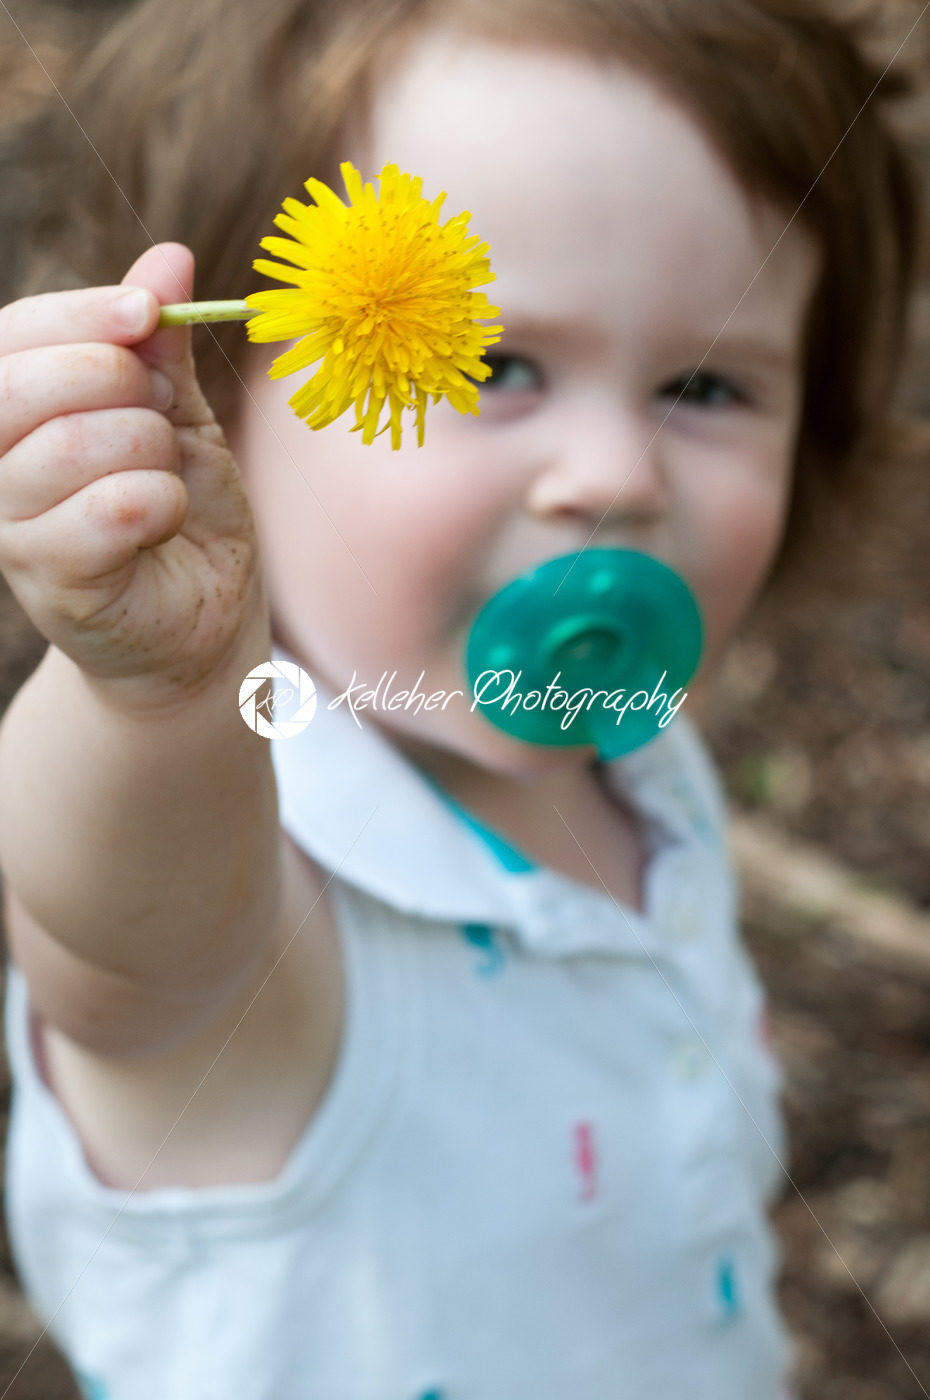 Young toddler girl holding up a dandelion - Kelleher Photography Store